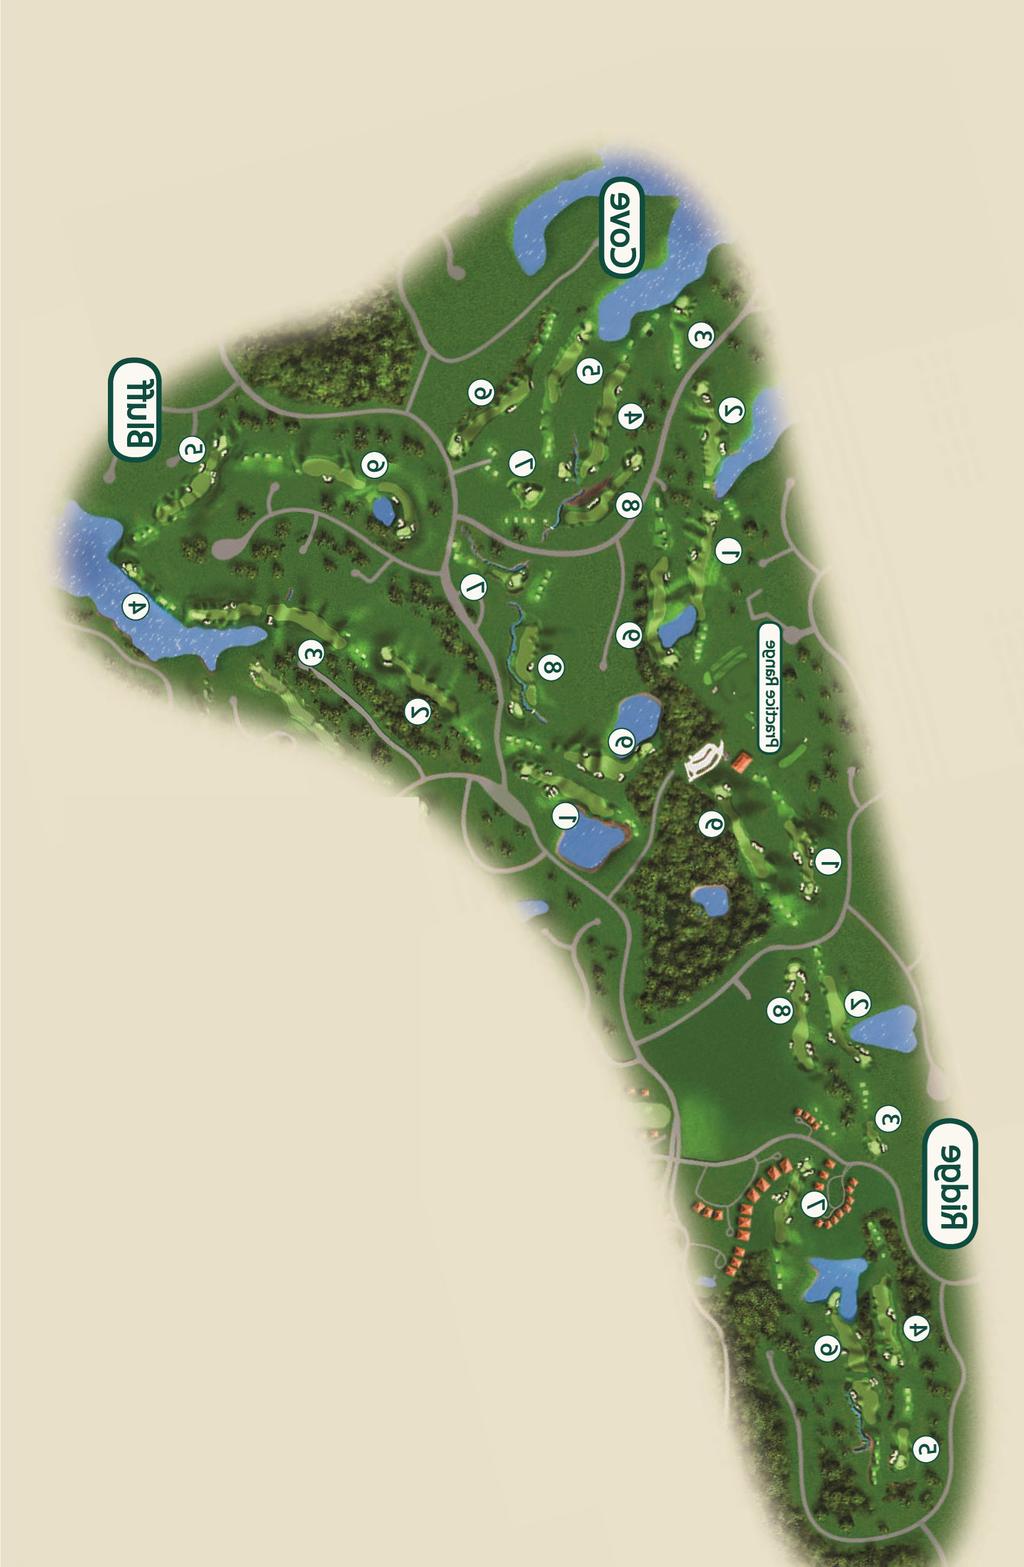 The National Course The National Course is a 27-hole masterpiece designed by Tom Fazio.